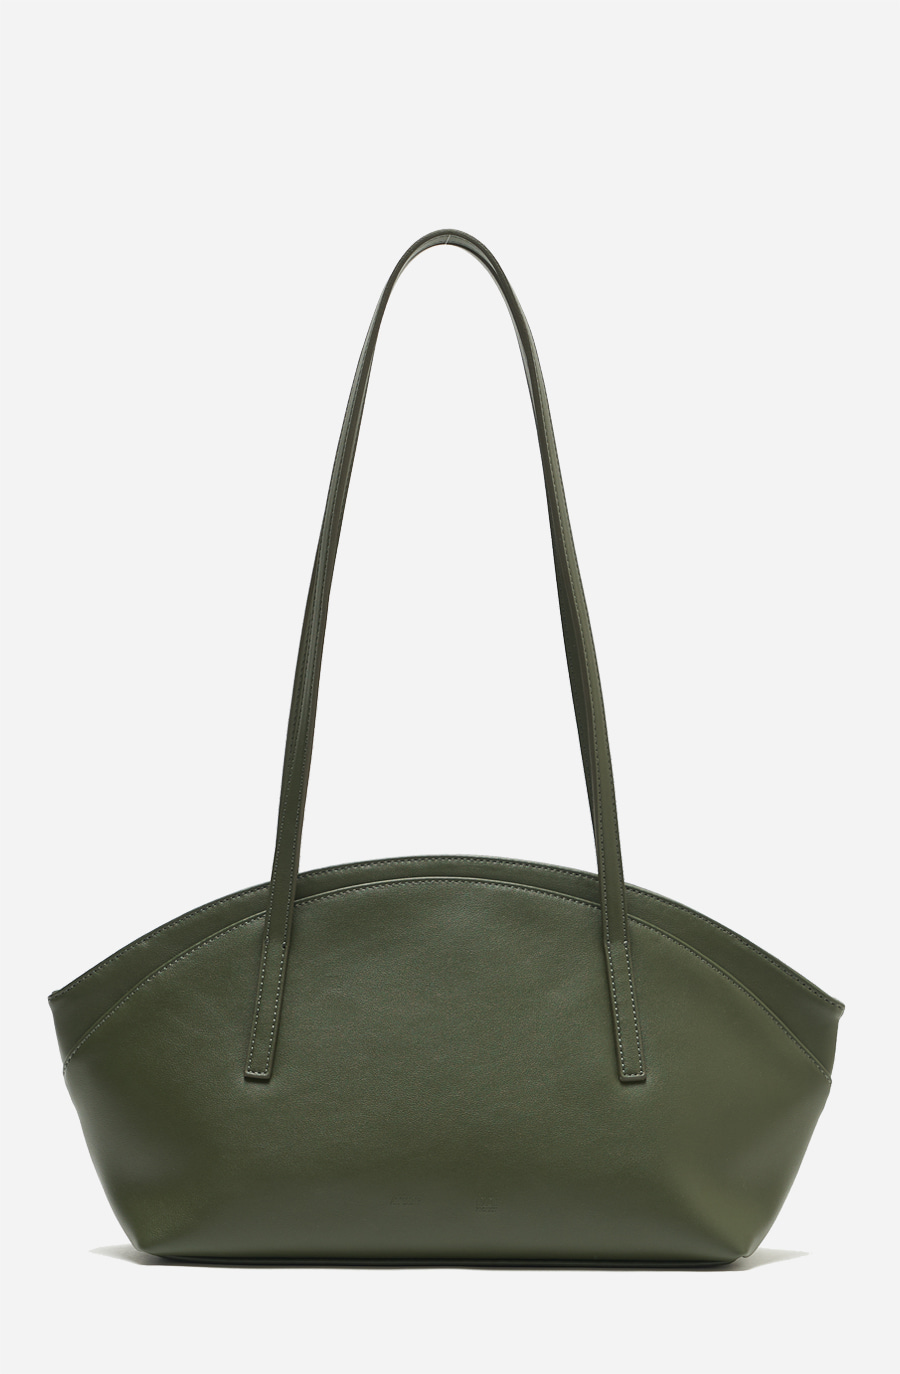 SMALL CLAM BAG (solid deep green)